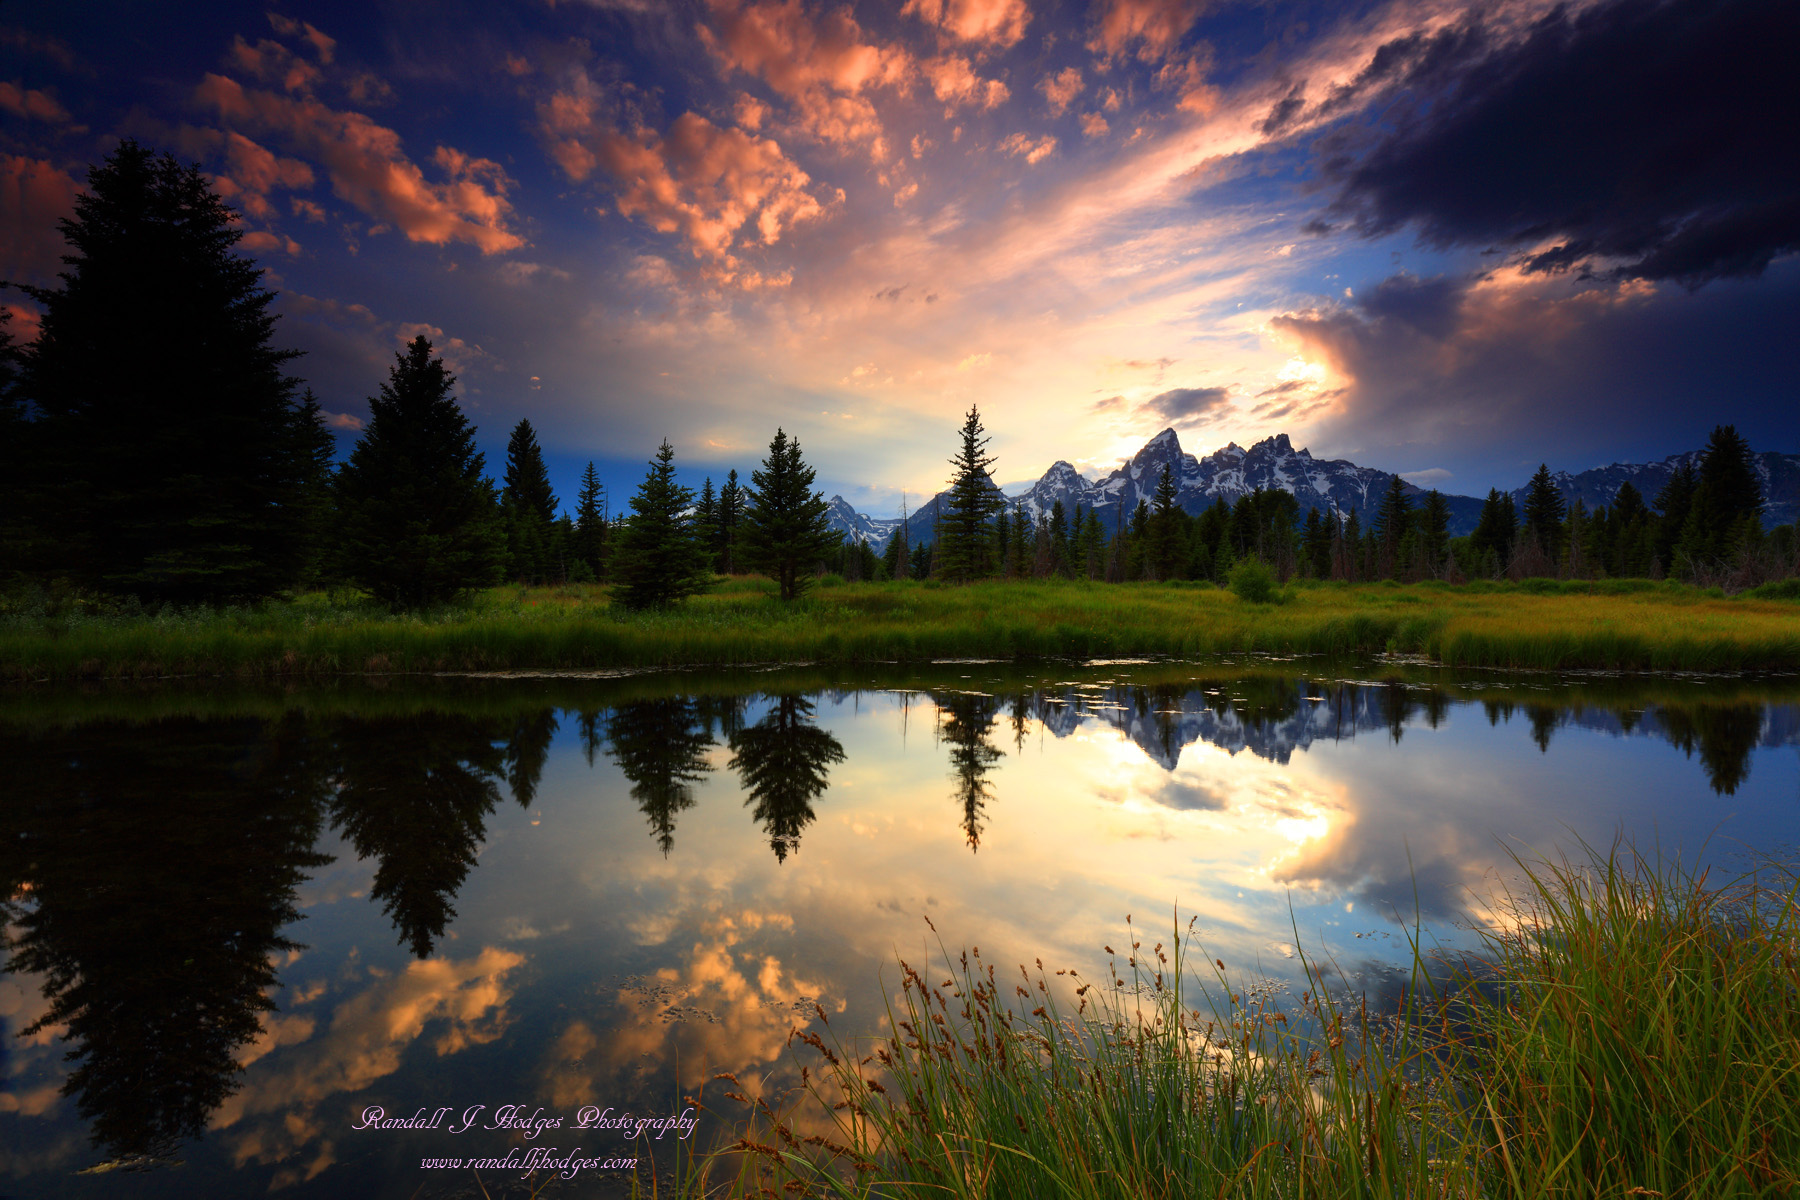 Randall Hodges, FisheyeConnect, Photography Workshops, Sunset with the Grand Tetons Reflected in Schwabachers Landing Beaver Ponds in Grand Teton National Park in Wyoming